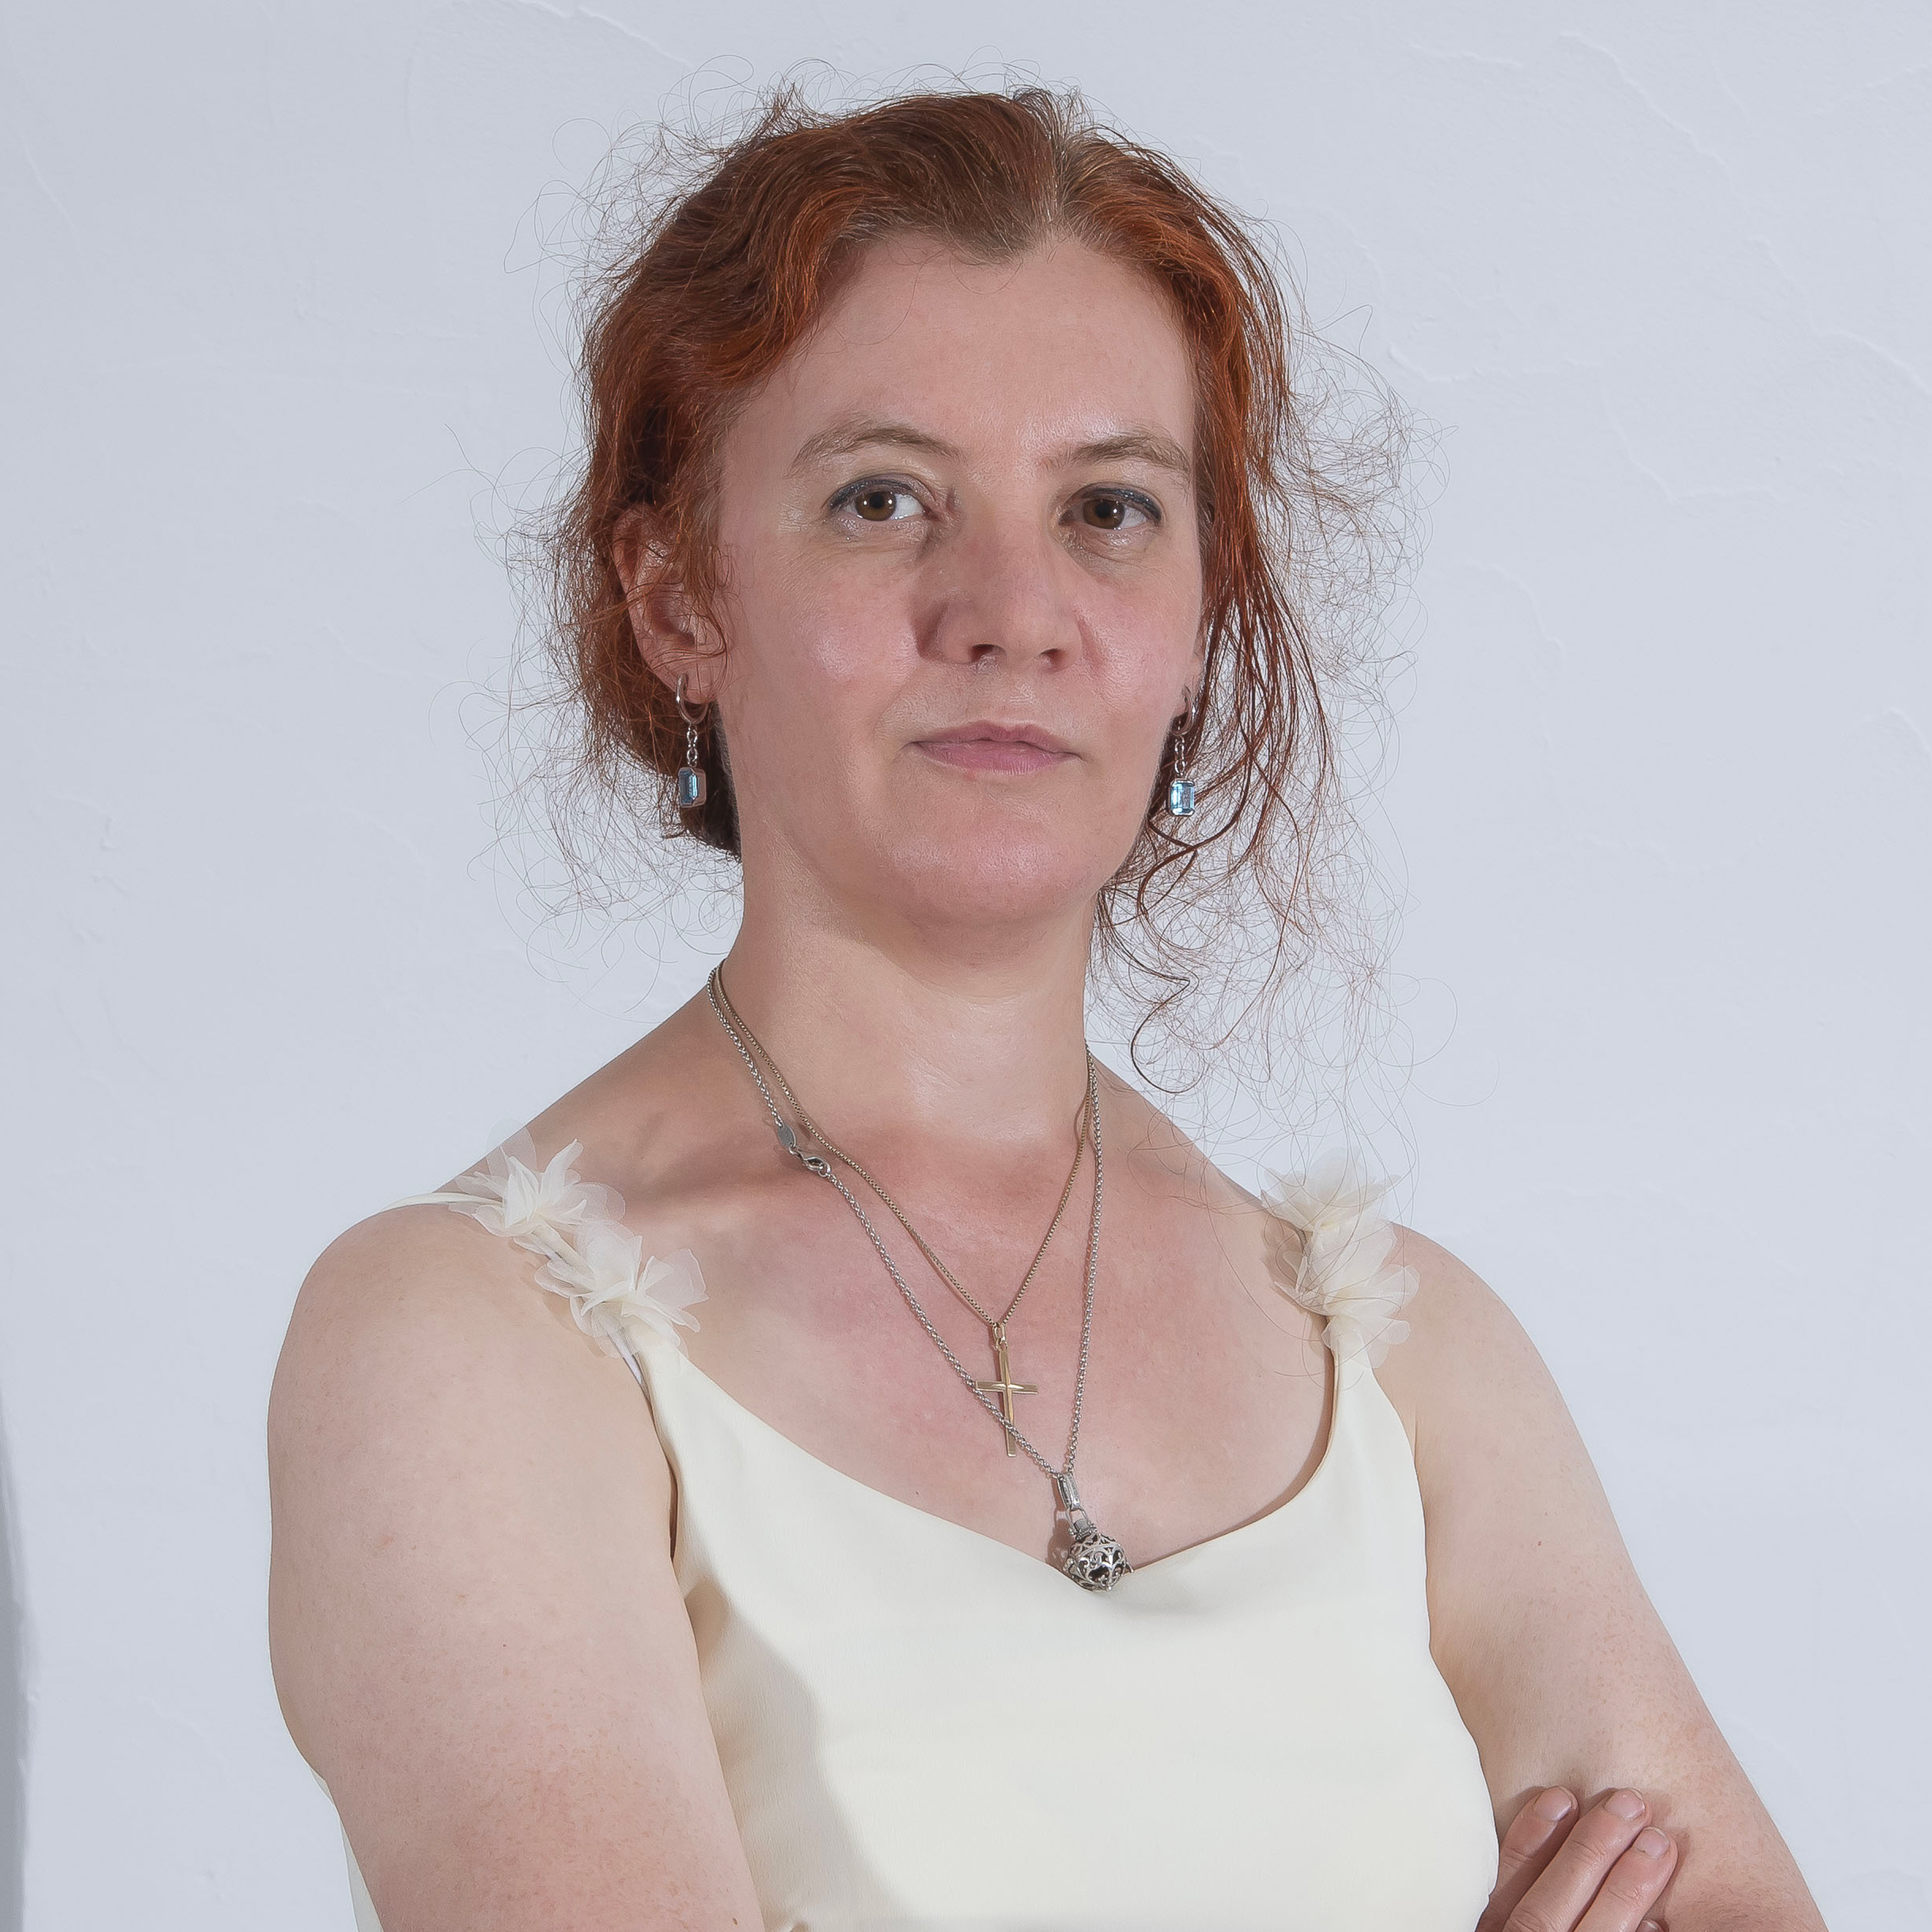 Profile picture for user Astrid Tötsch